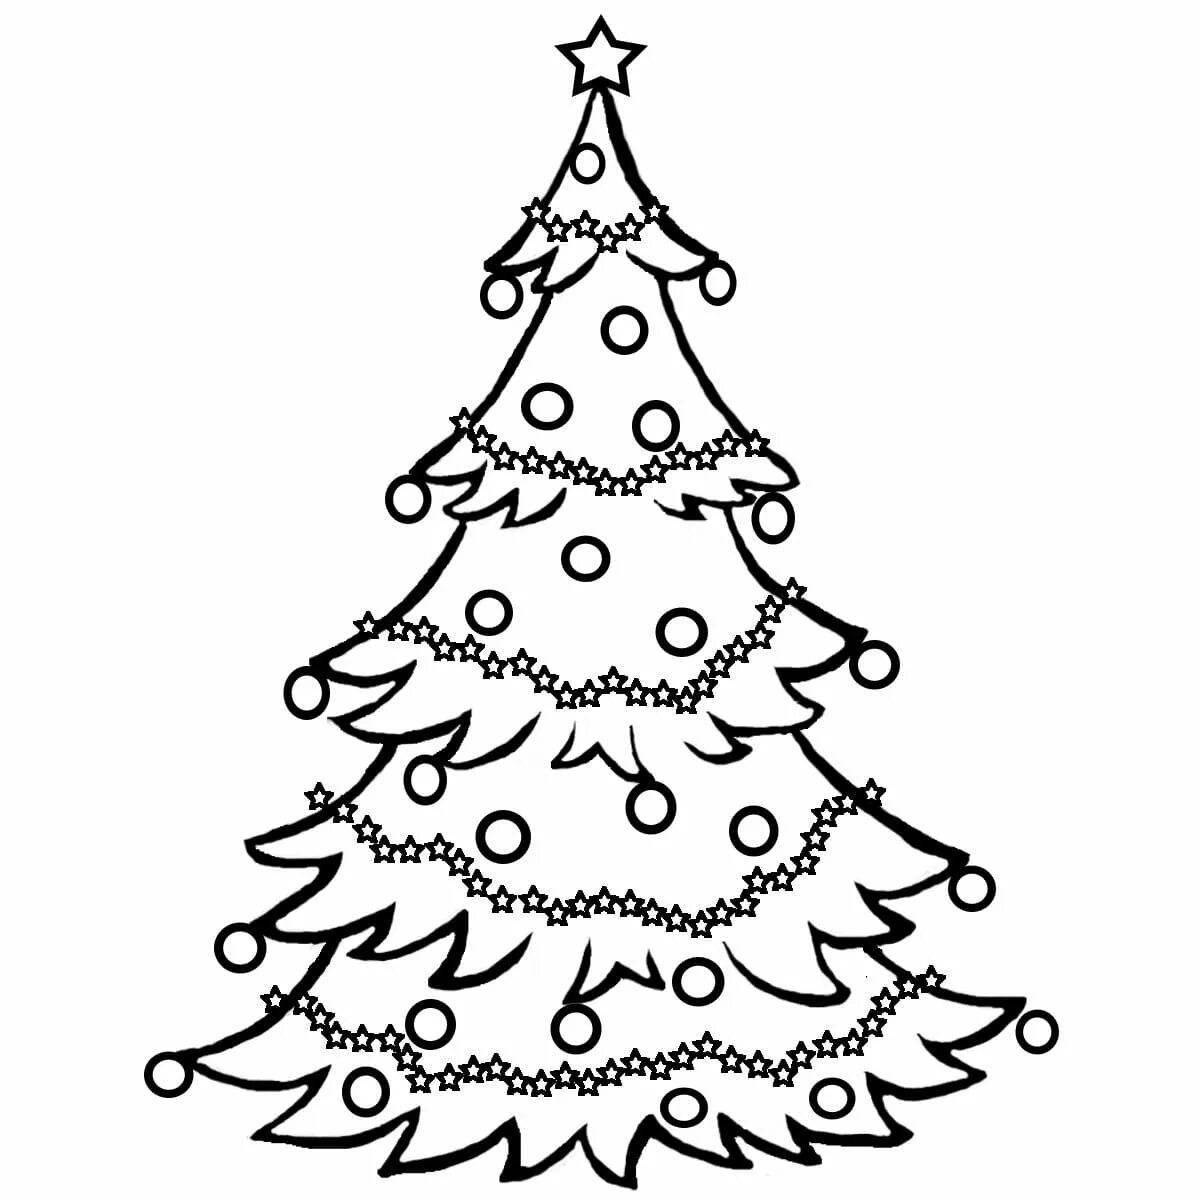 Amazing tree coloring page